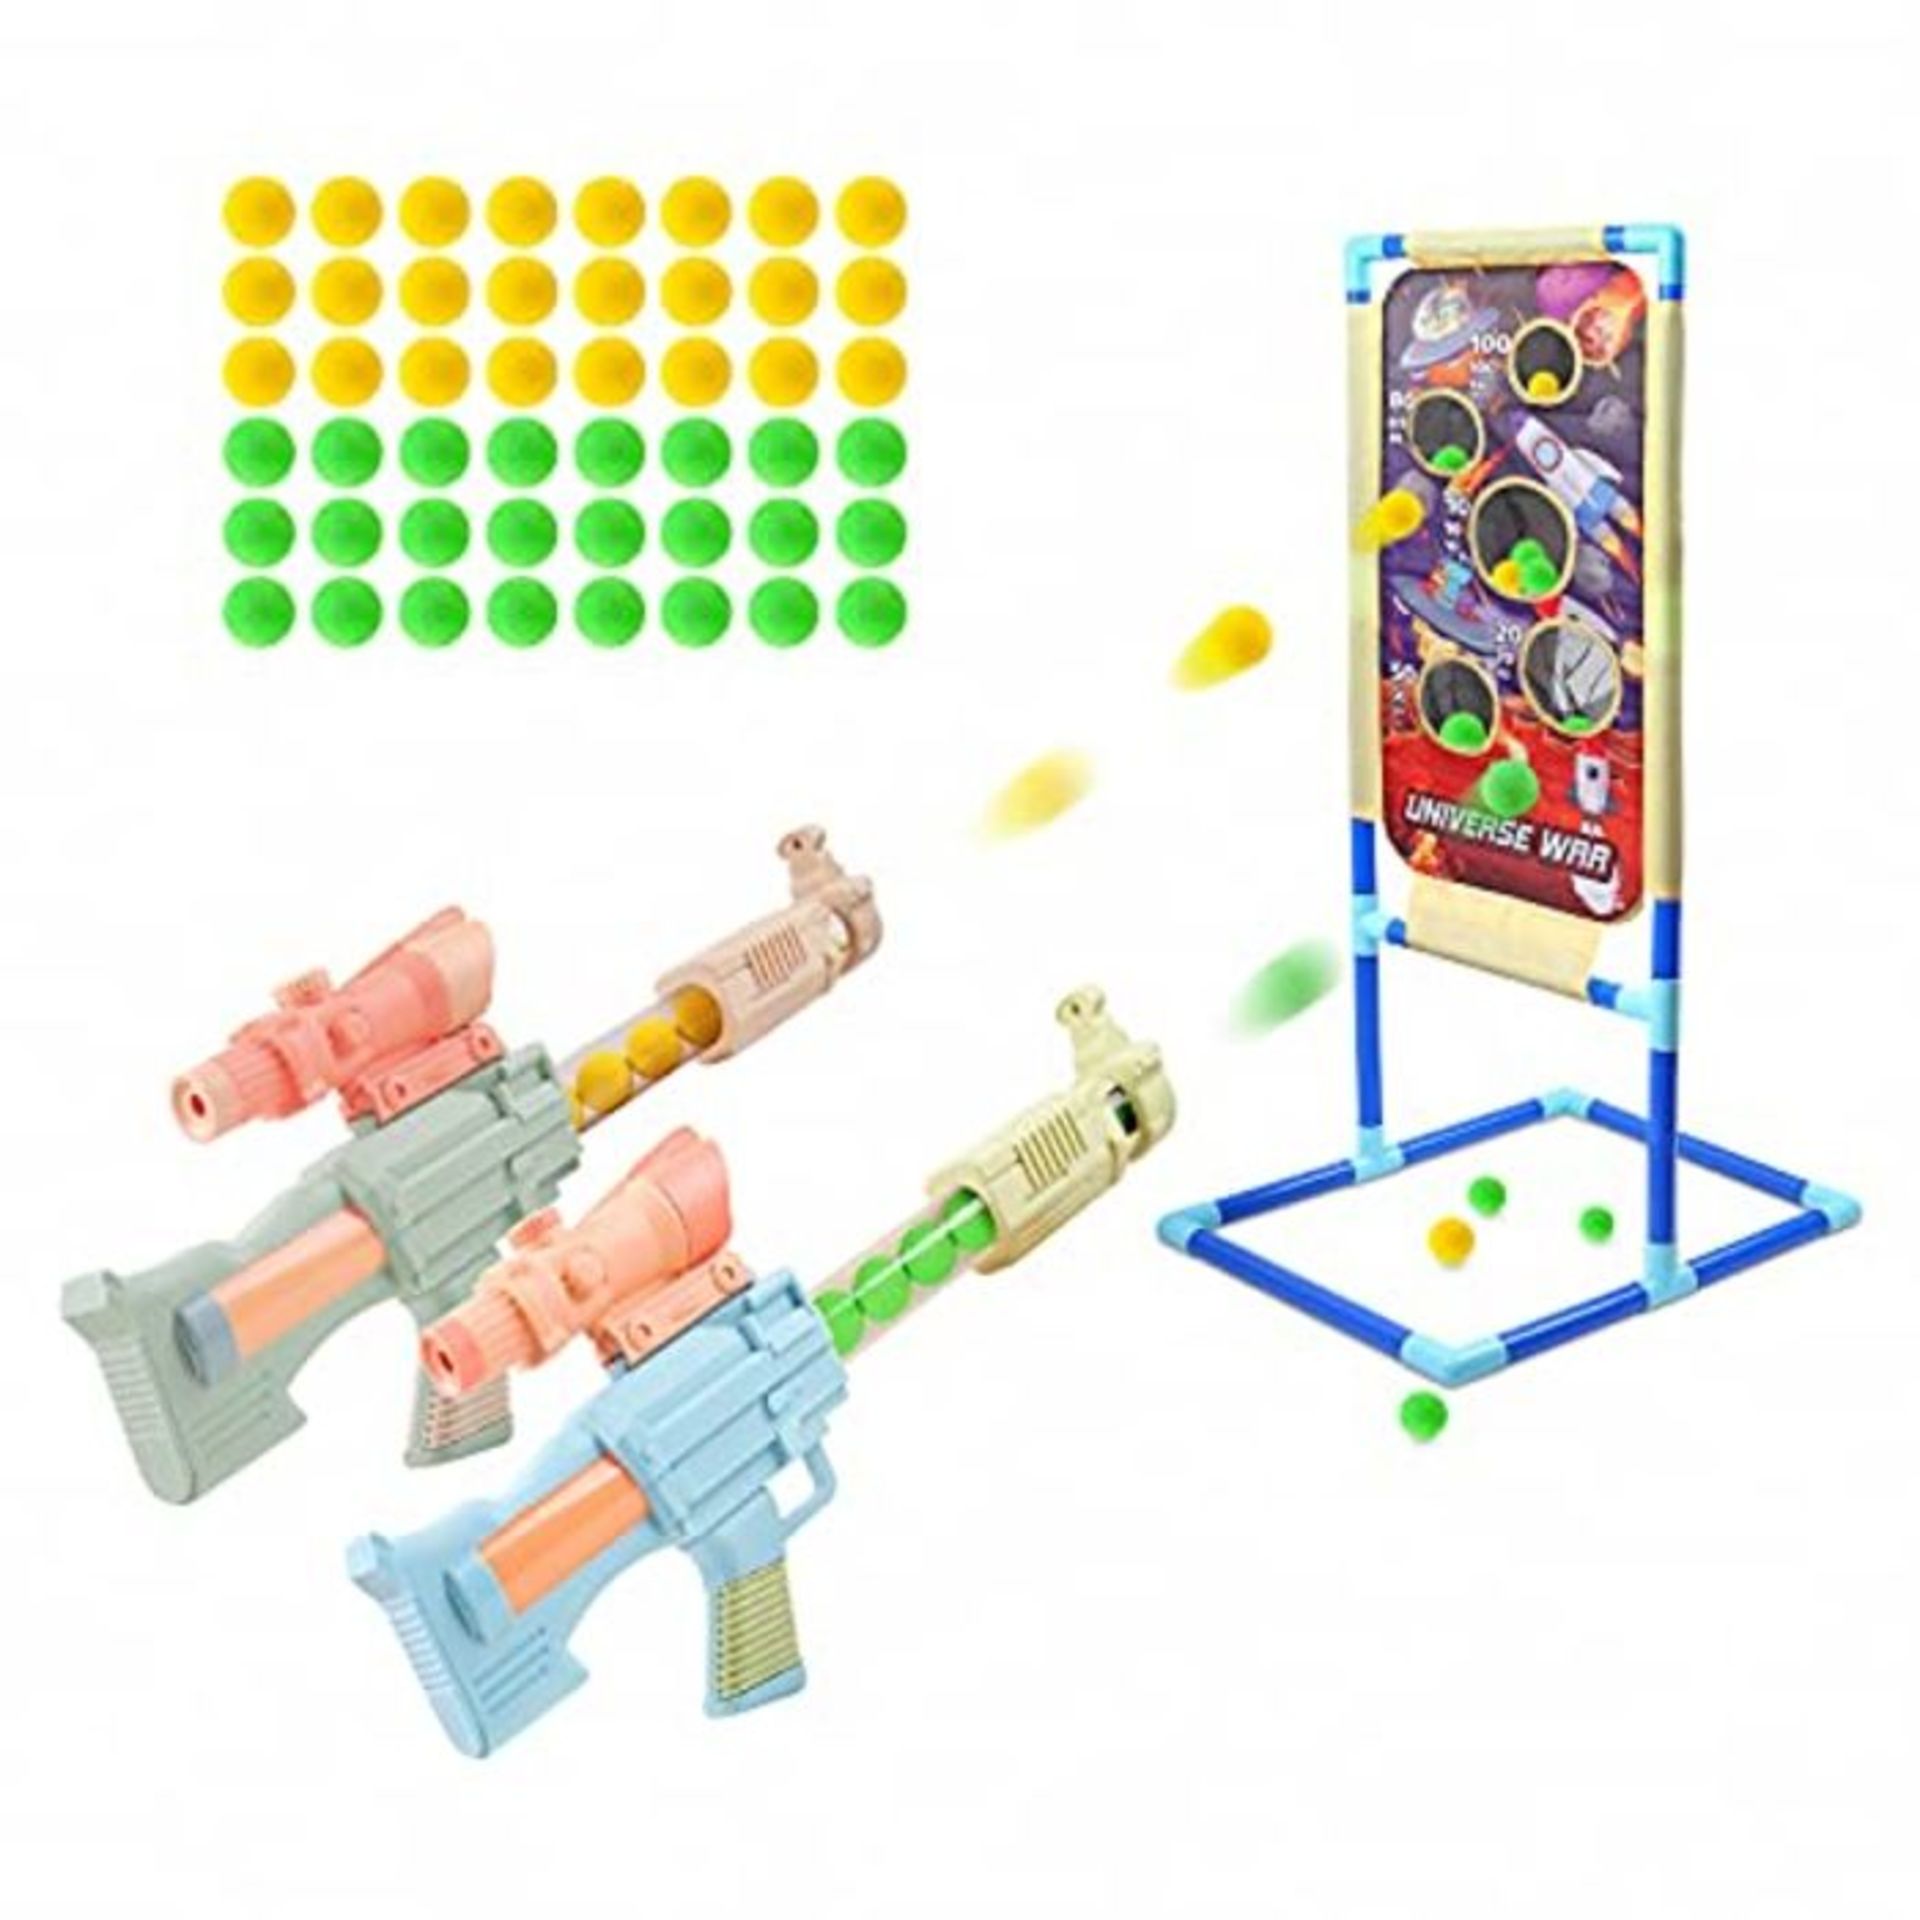 Wstbspsm Shooting Game Toy for Children Shooting 2 Players Toy Foam Blaster Air Rifles